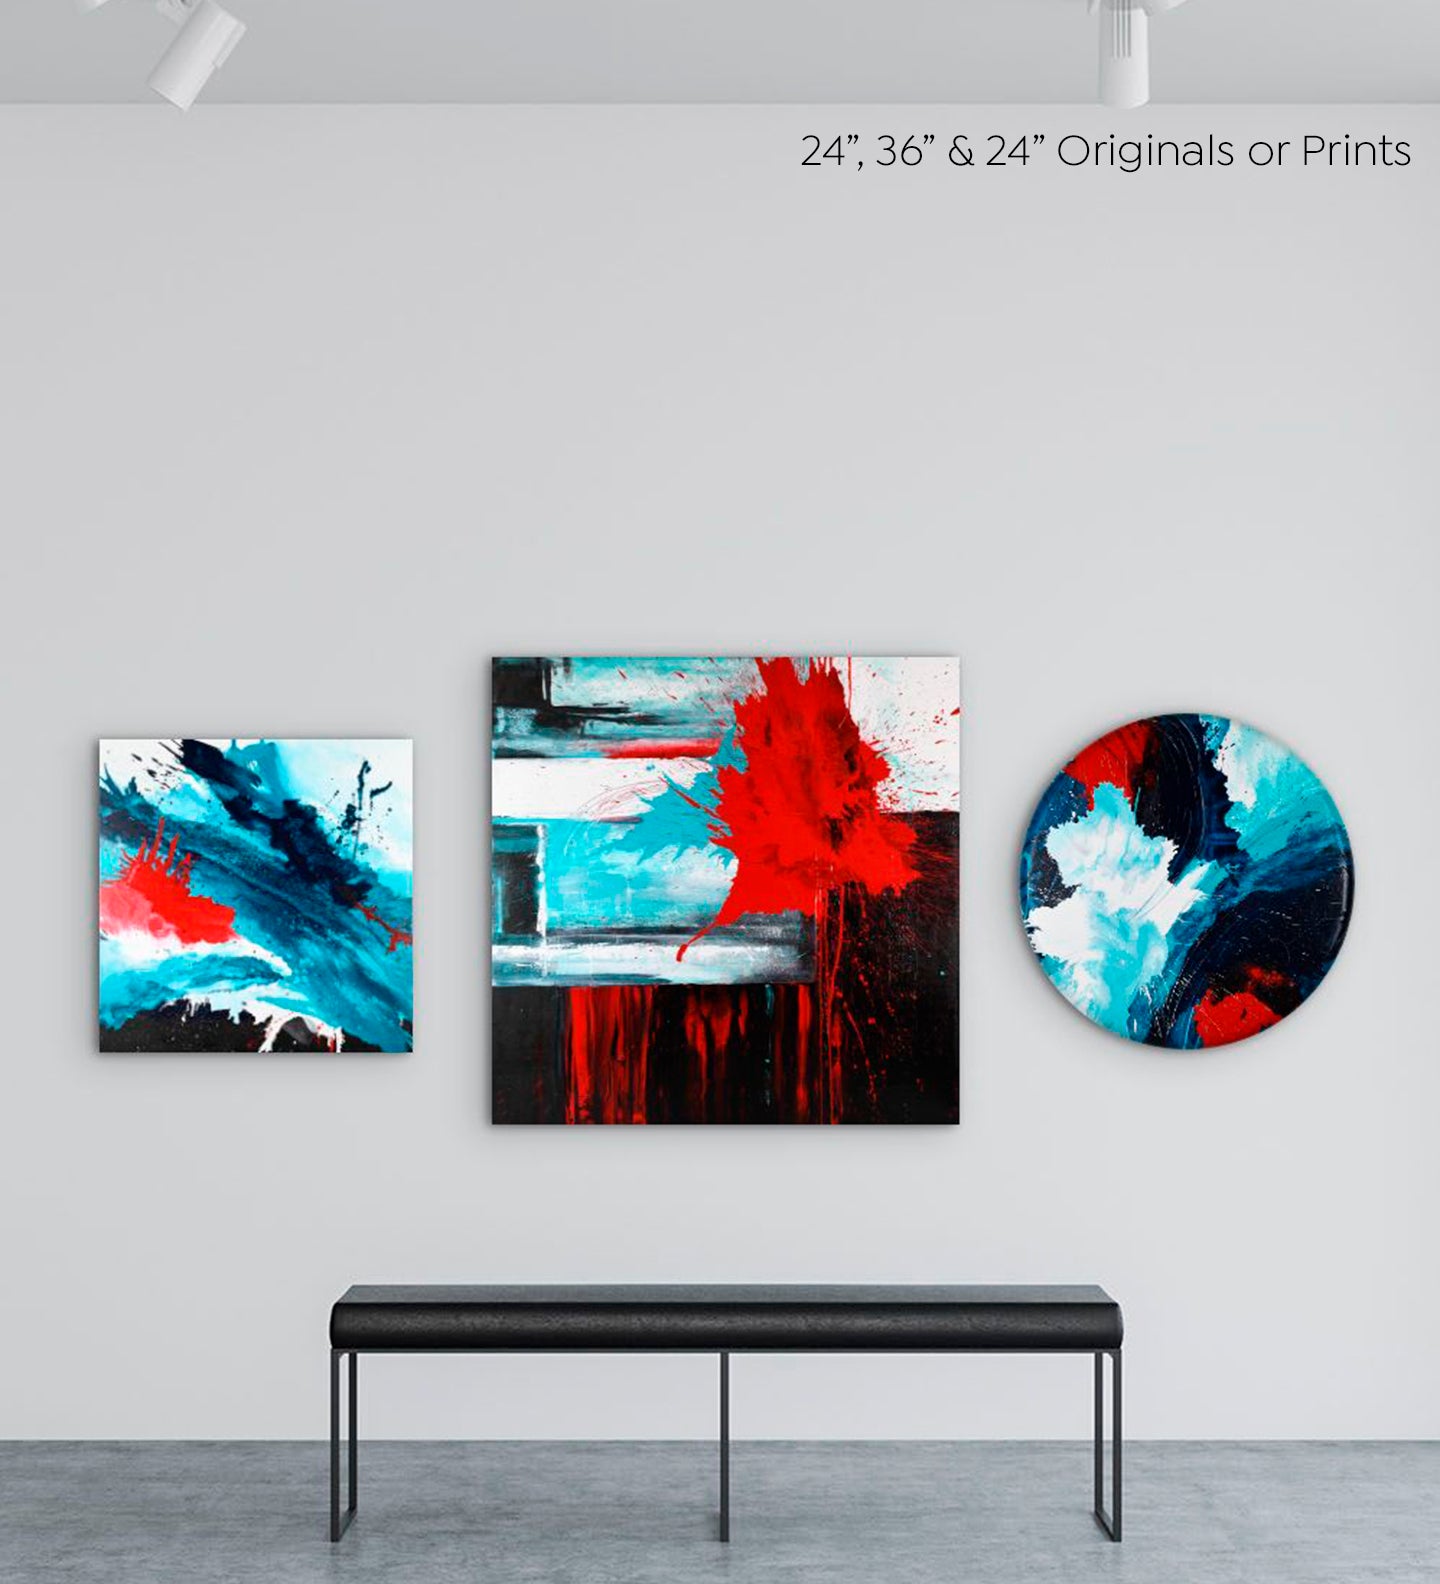 Abstract Expressionism acrylic 24” print or original (on the left): black, red, bright white and turquoise blue on square Convexo, curved-edge canvas on white gallery wall with two other paintings from the same series.